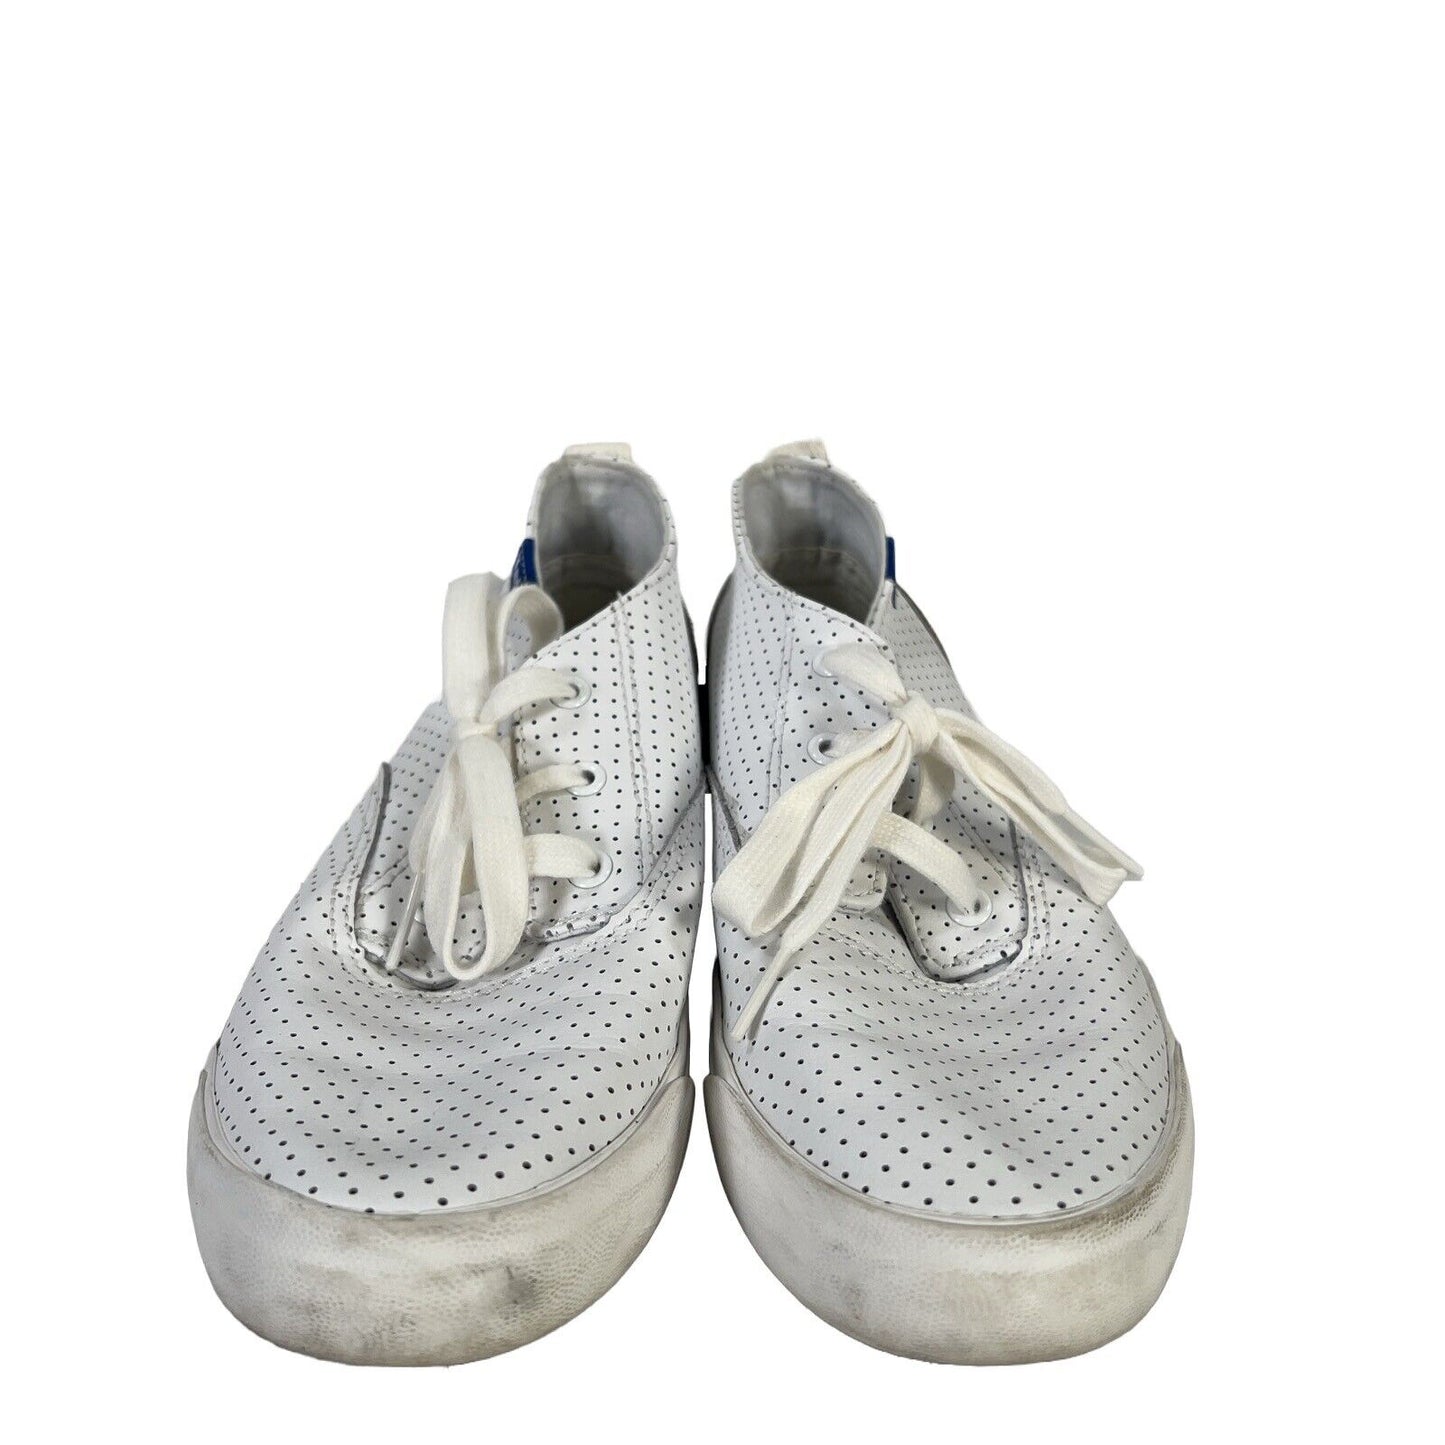 Keds Women's White Perforated Leather Lace Up Sneakers - 7